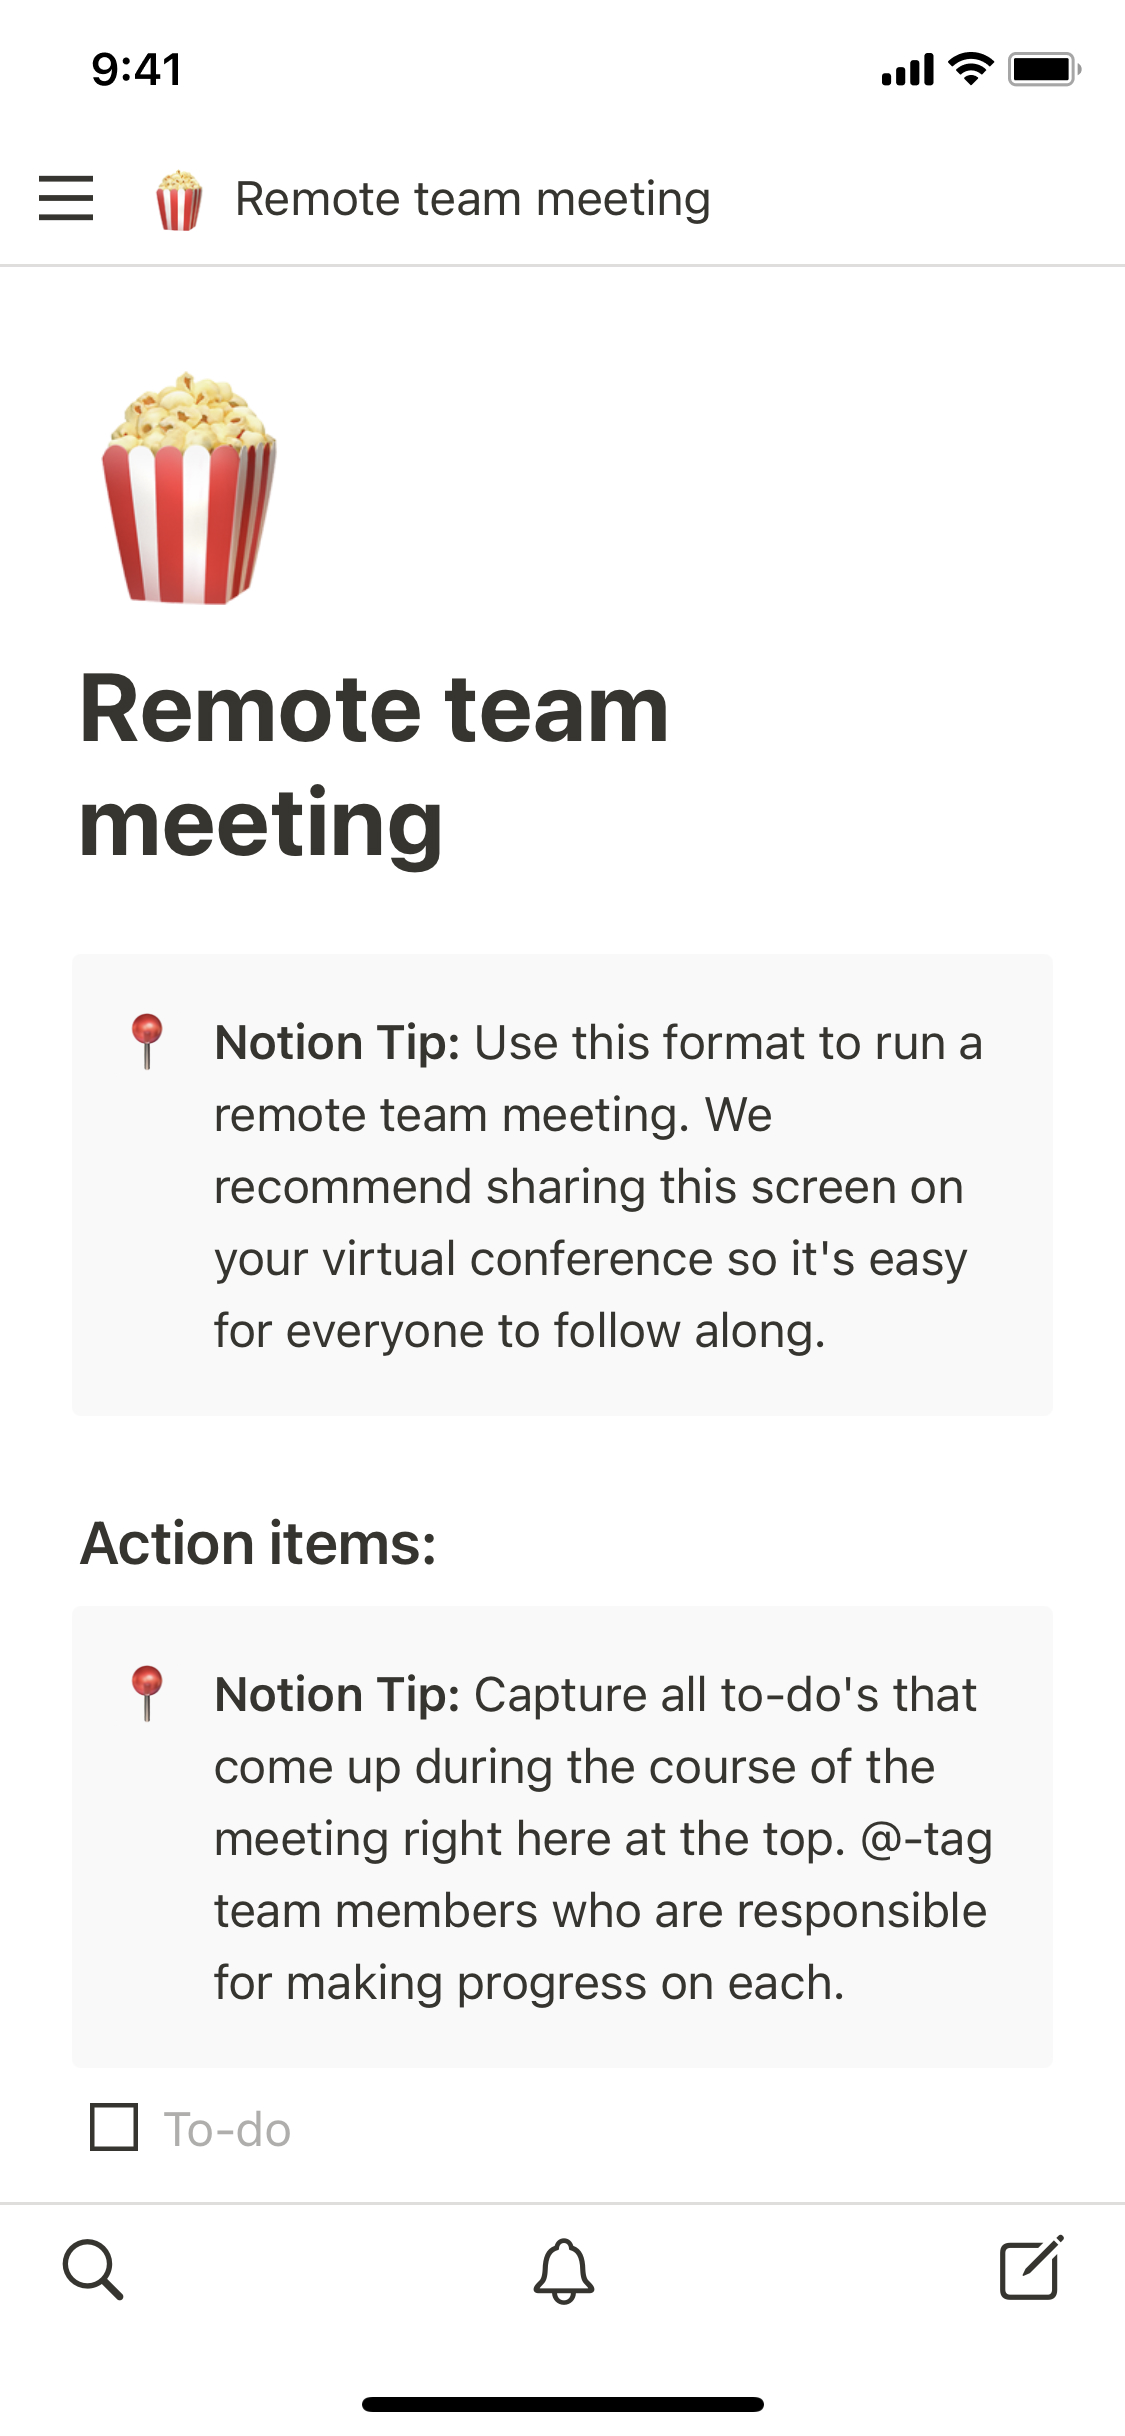  The mobile image for the remote team meeting template